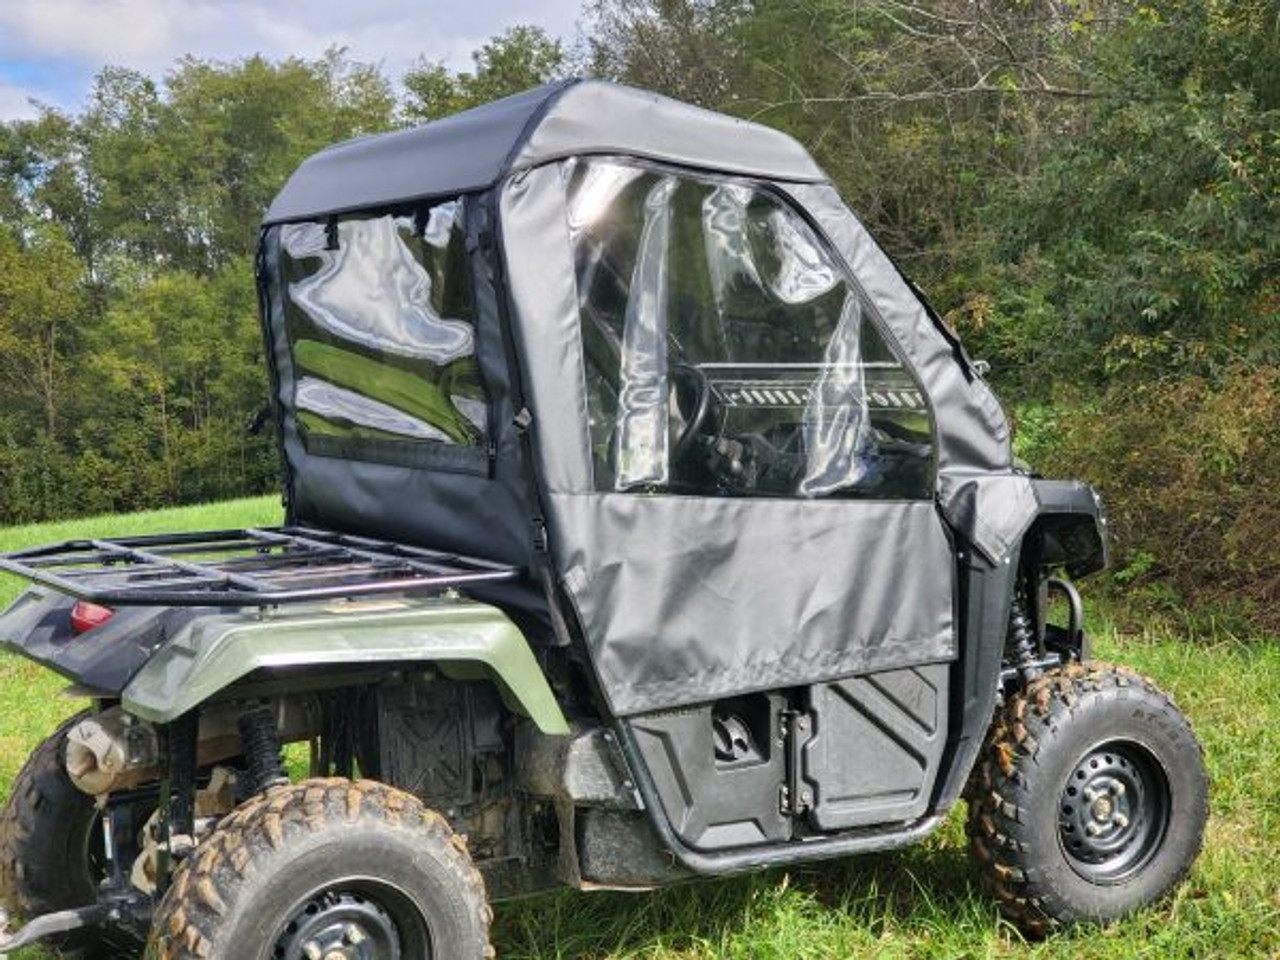 3 Star side x side Honda Pioneer 500/520 doors and rear window side and rear angle view